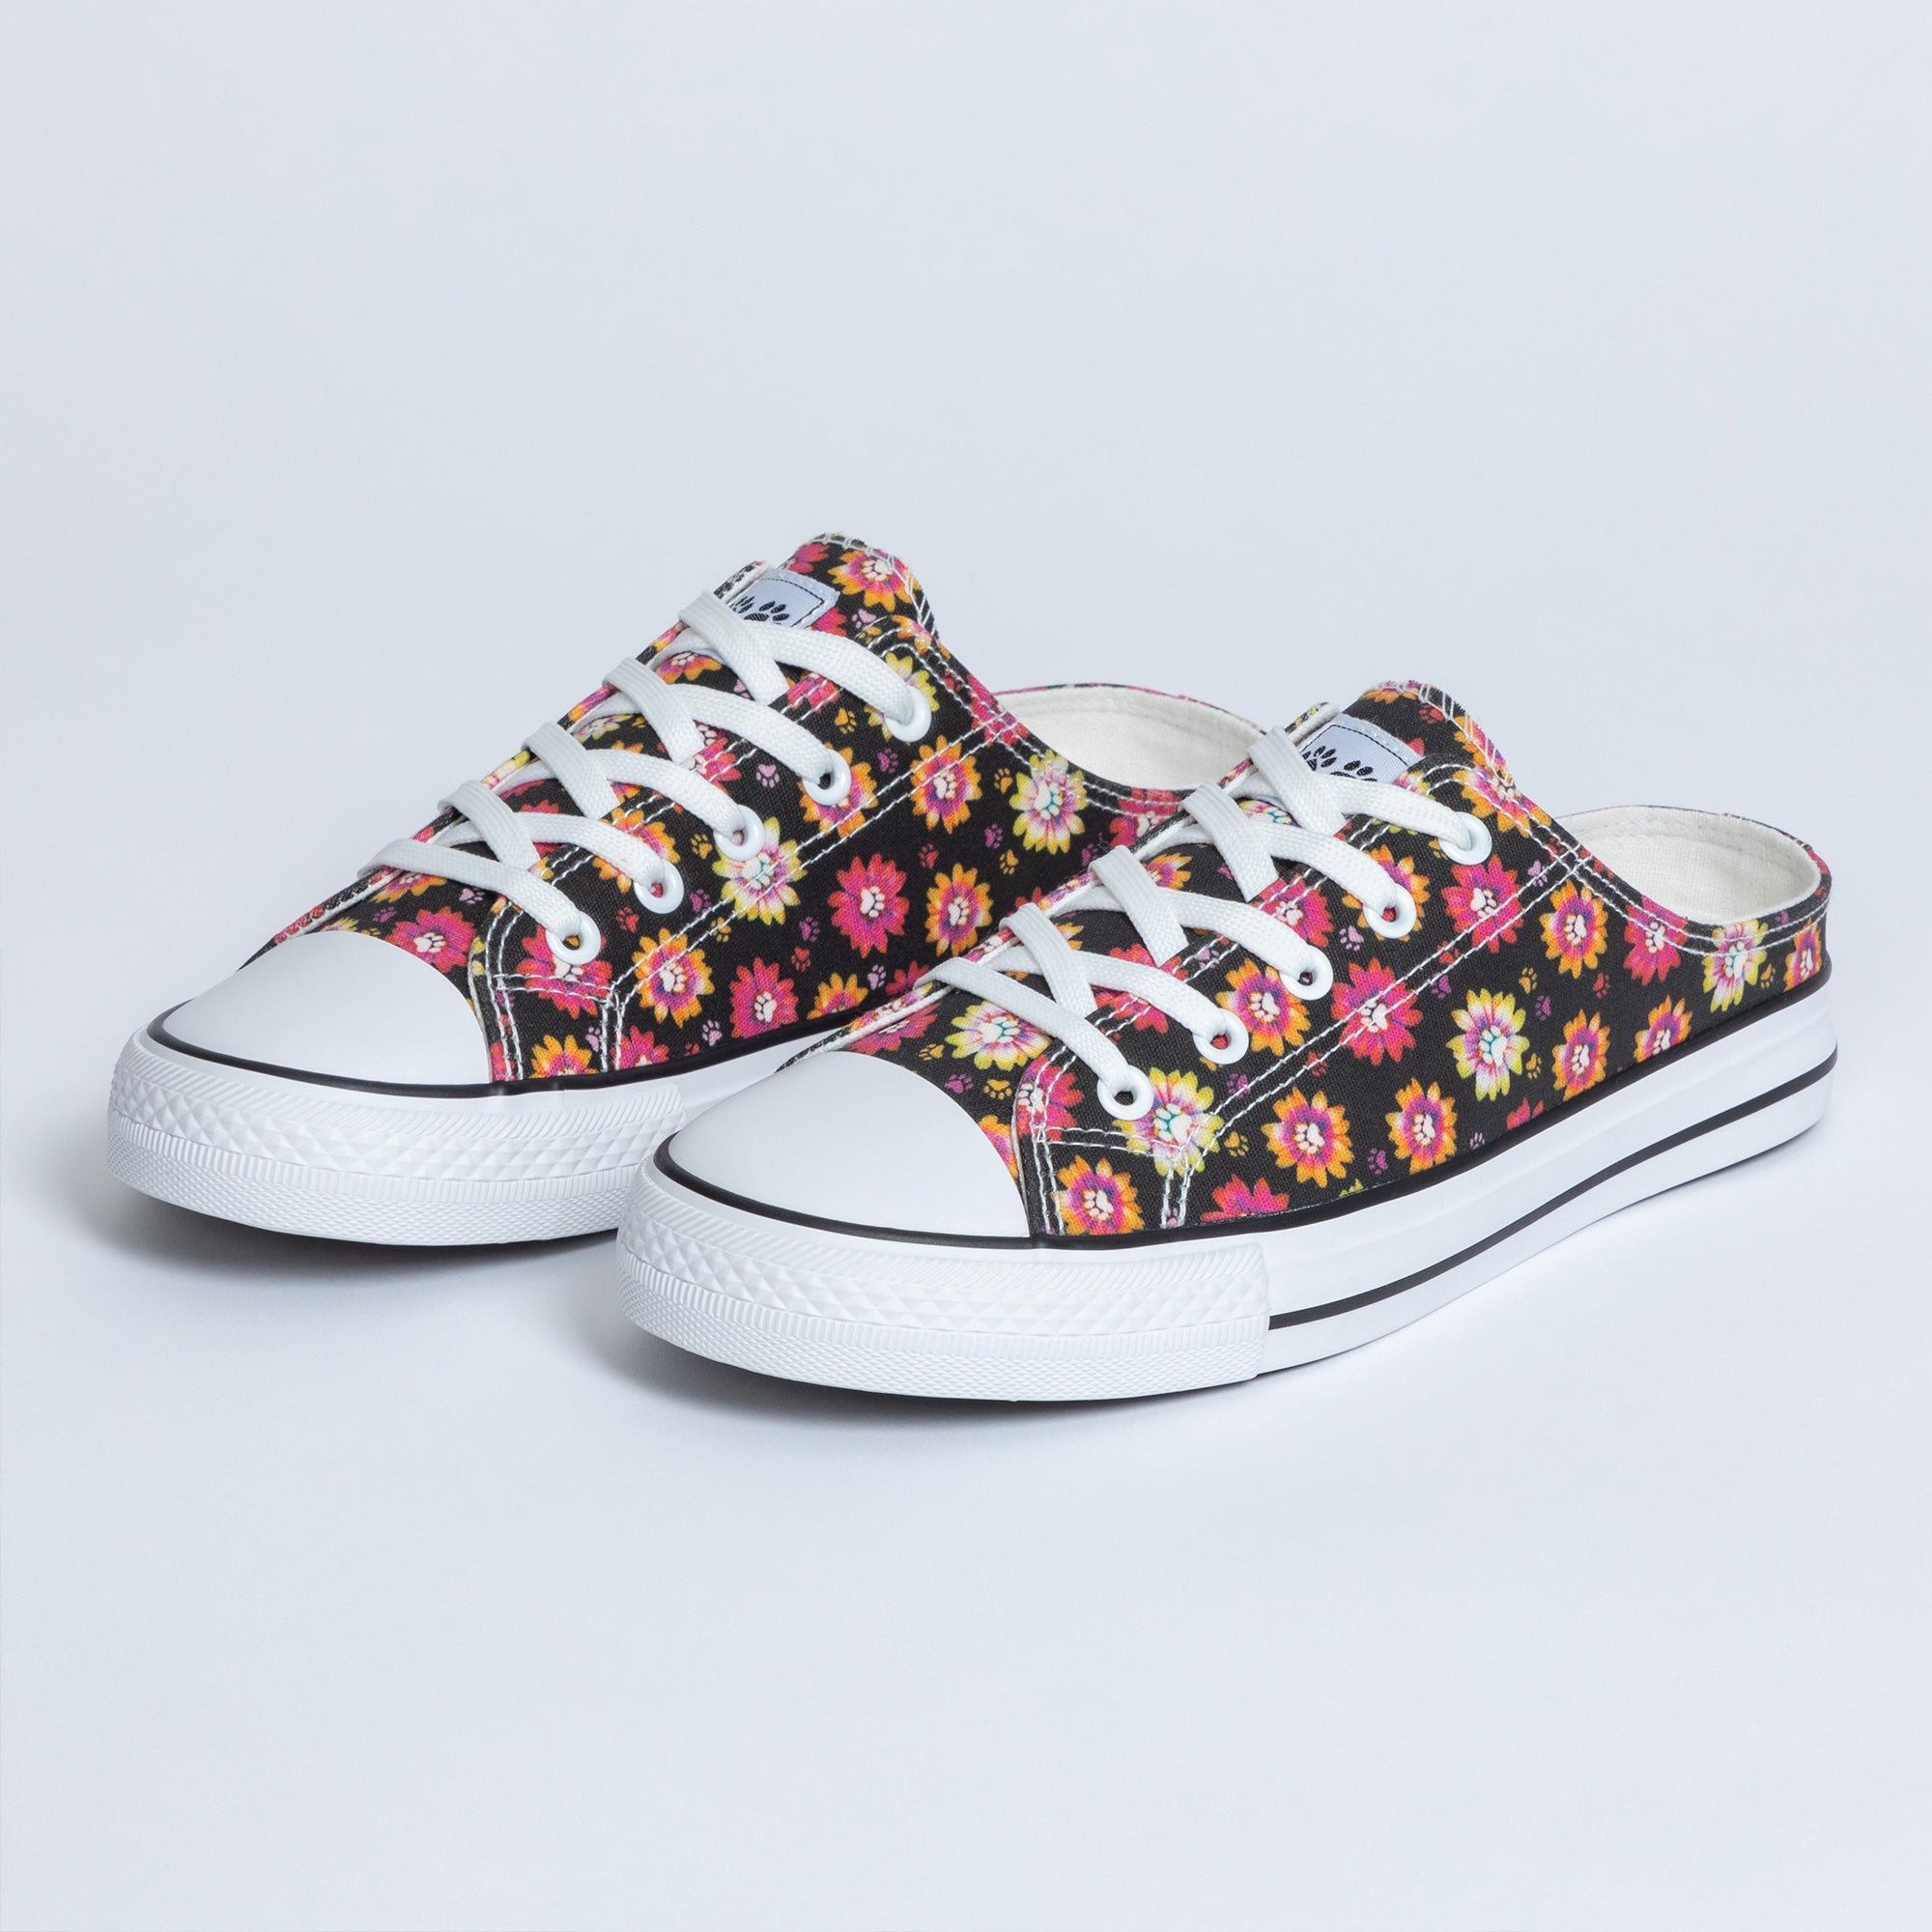 Paw Print Canvas Slip-On Sneakers - Pretty Paw Daisies - 8